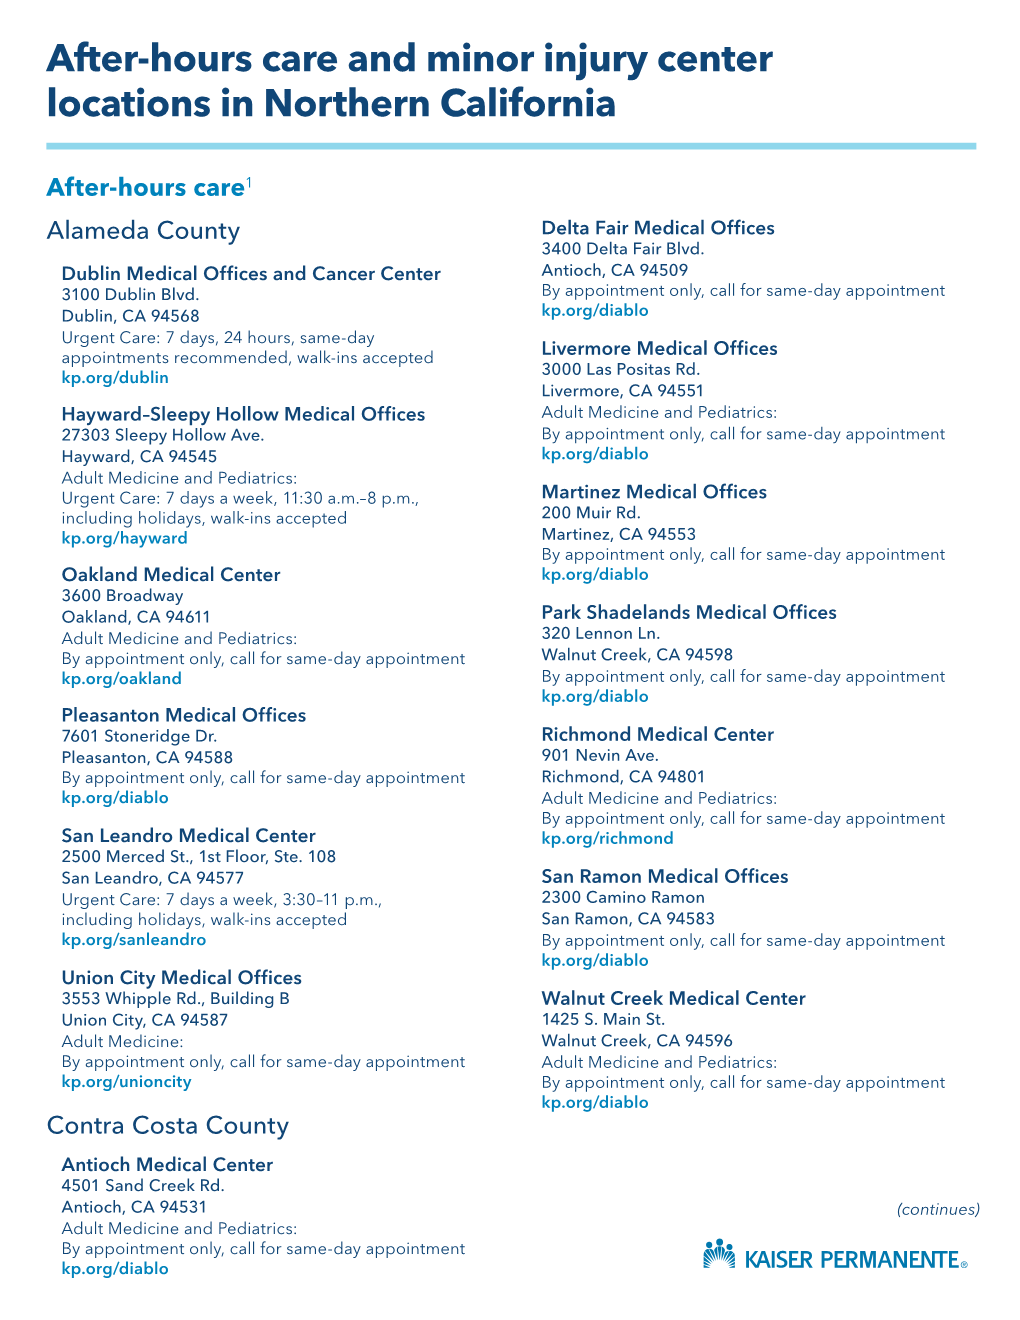 Kaiser Permanente: After-Hours Care and Minor Injury Center Locations